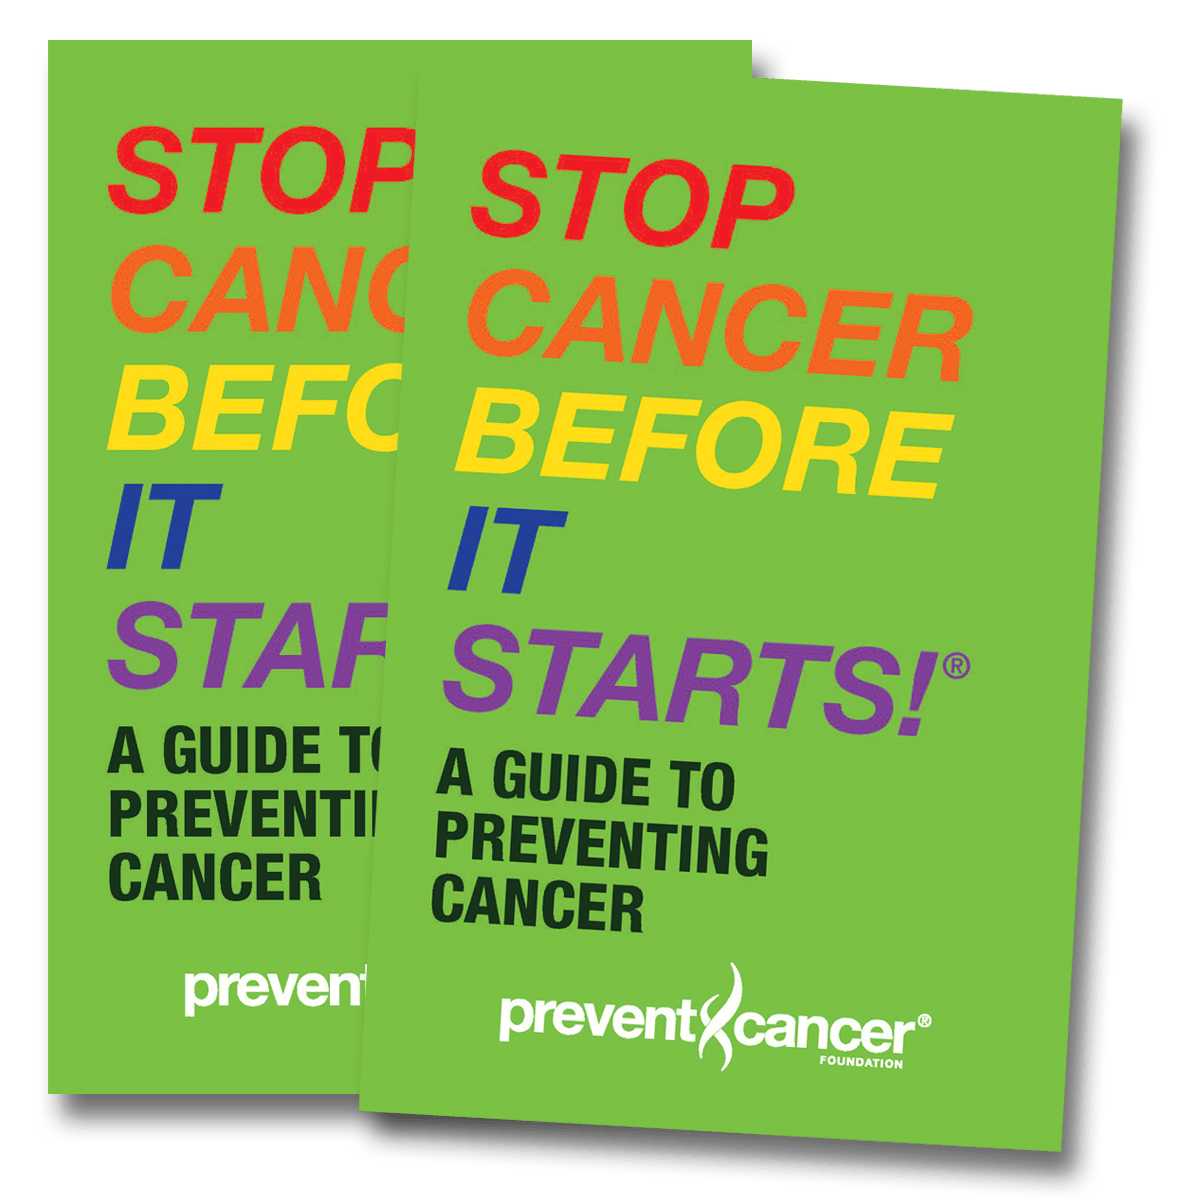 Stop Cancer Before It Starts! A Guide to Preventing Cancer